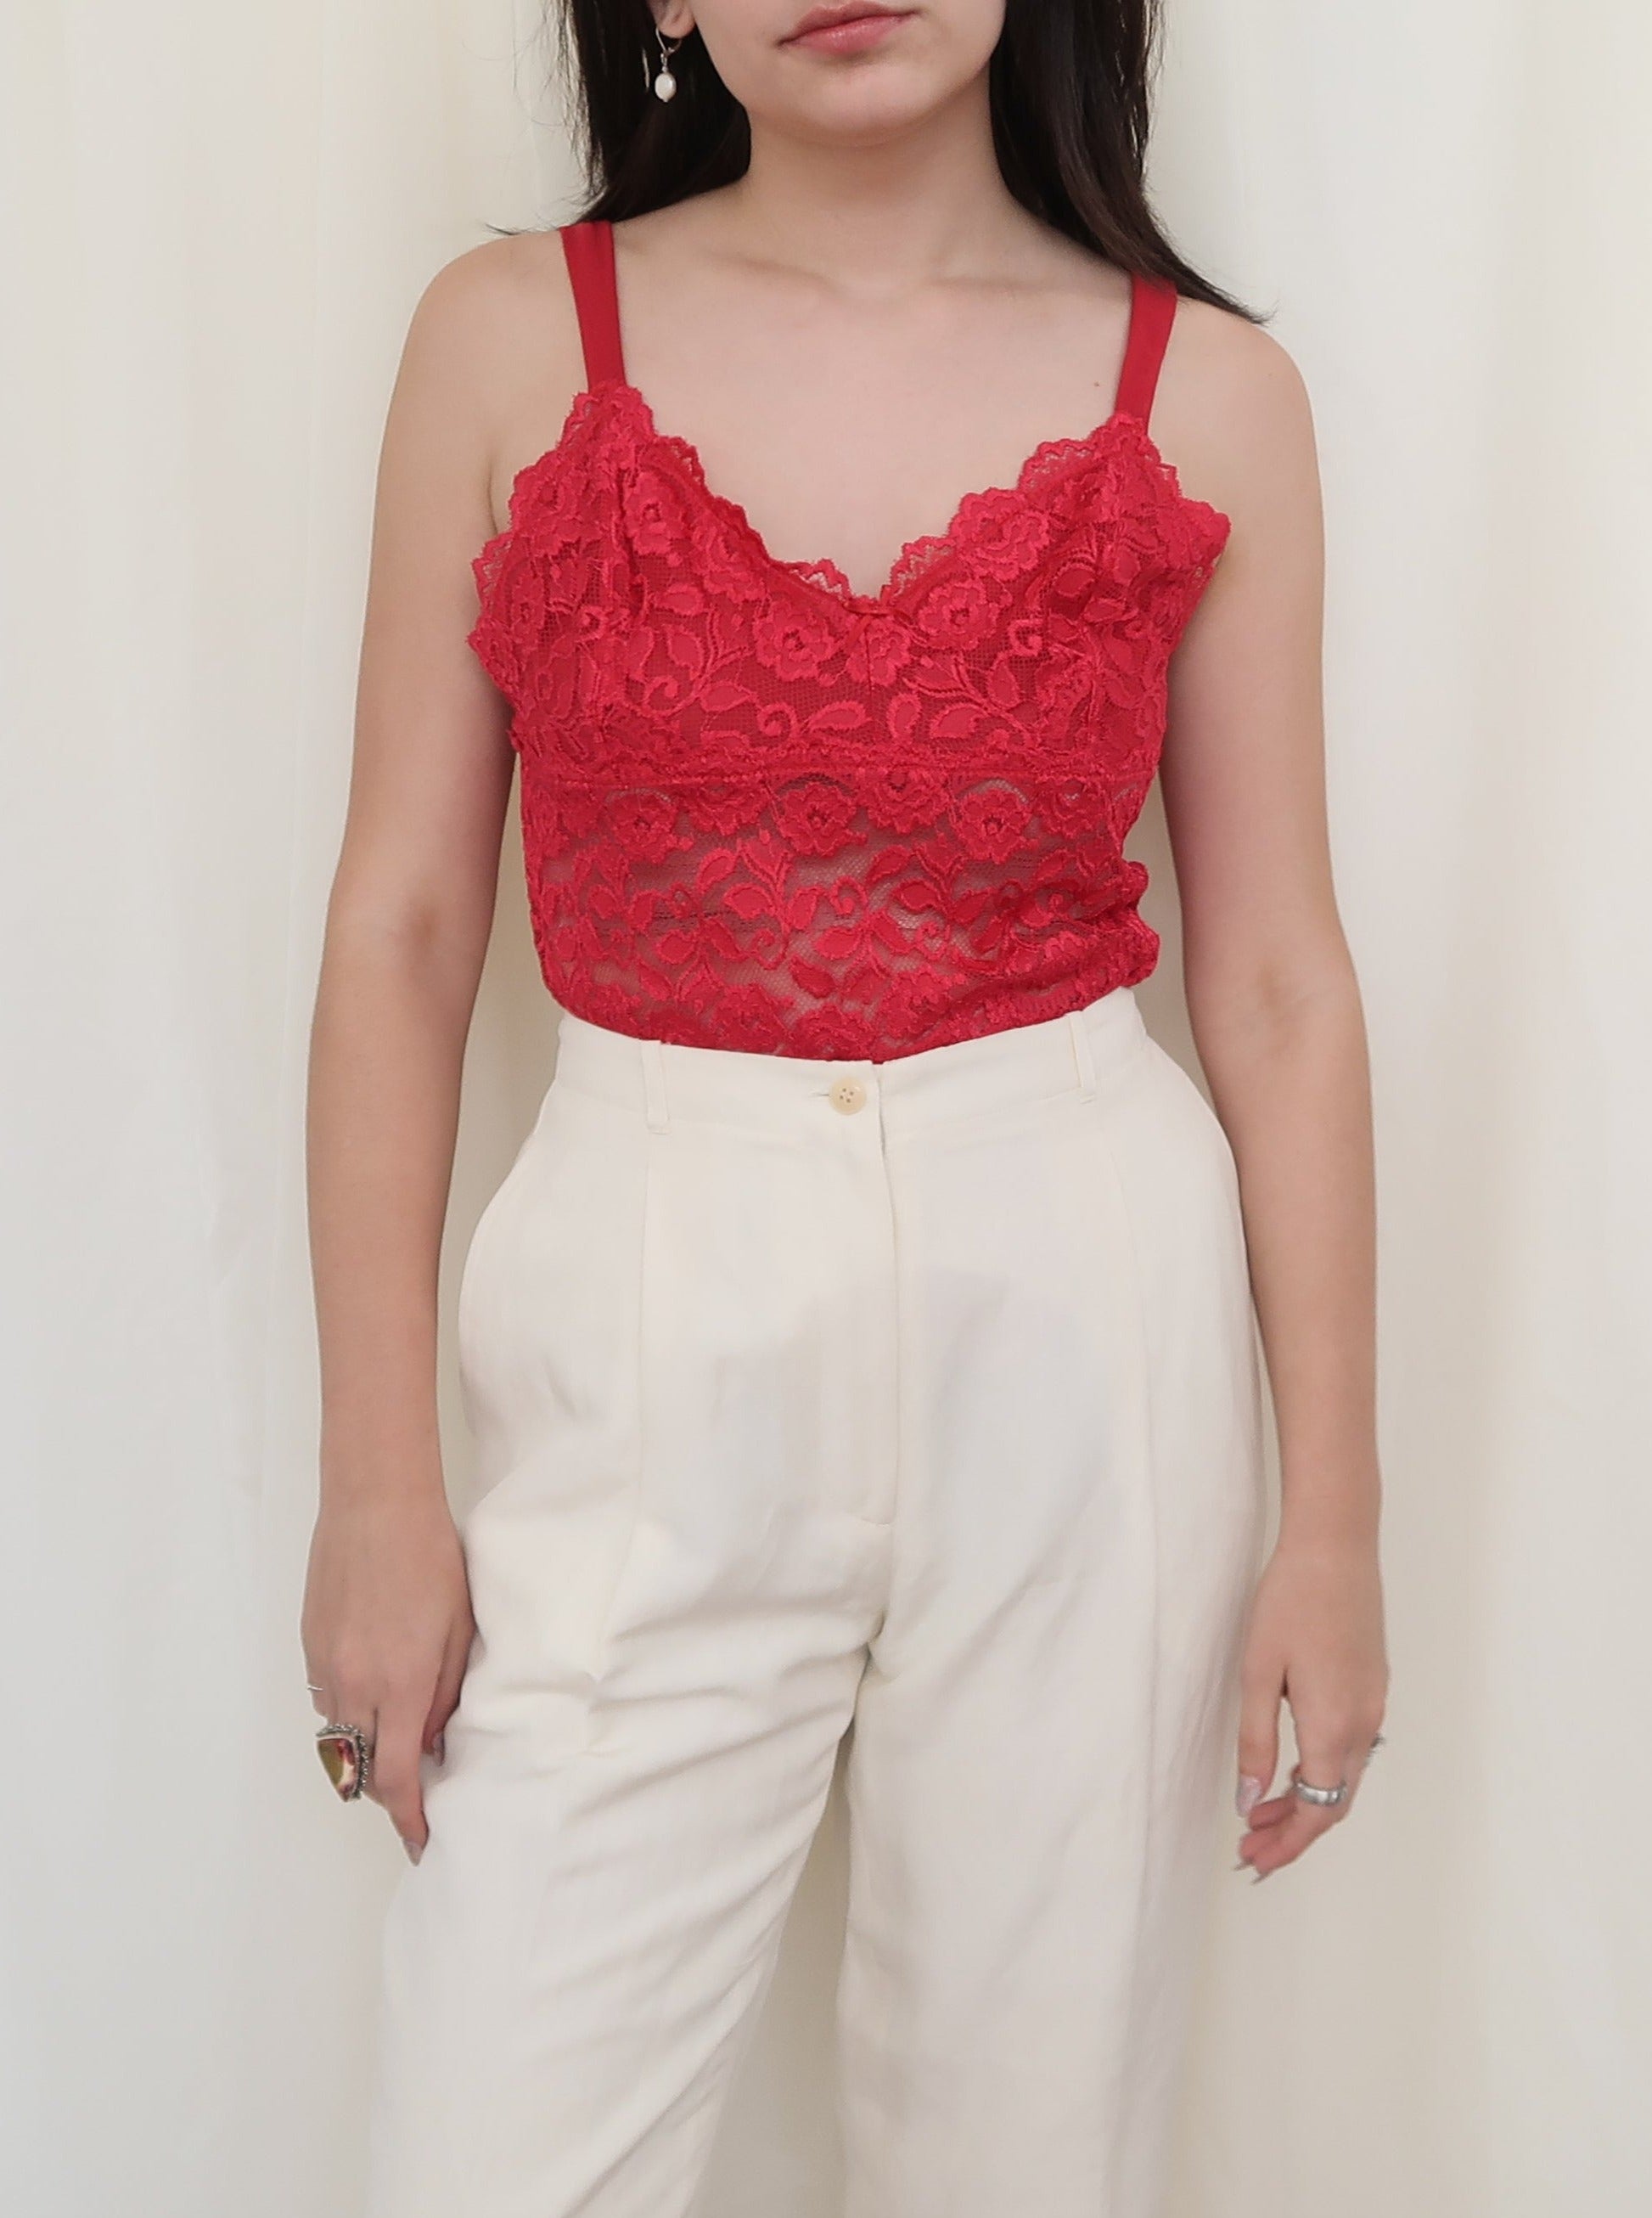 Red Cami Top - Lace Tank Top - Lacy Camisole Top - Lace Cami Top